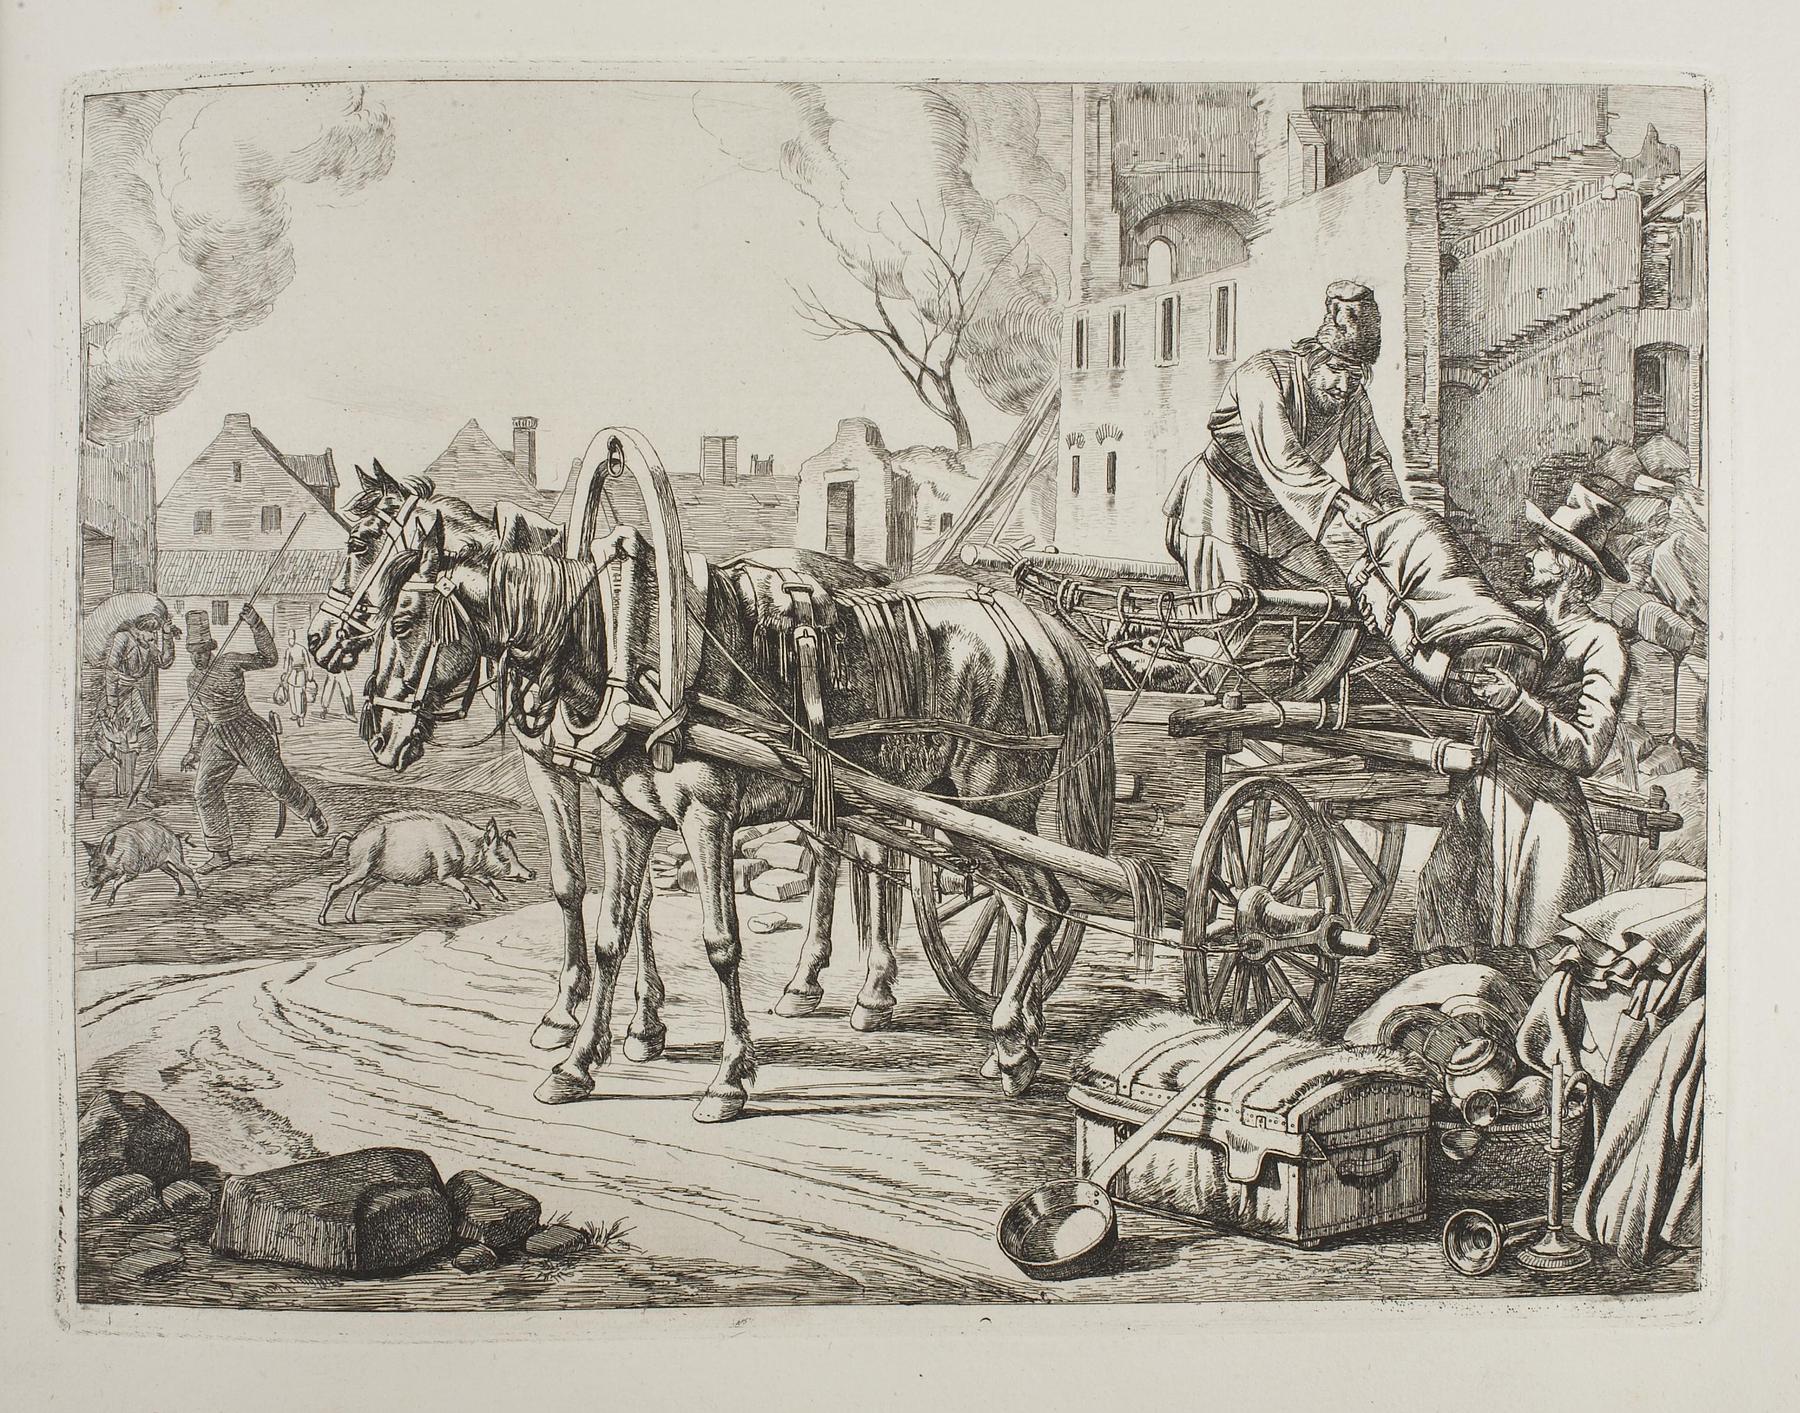 Cossacks Plundering in a Town, E721,4